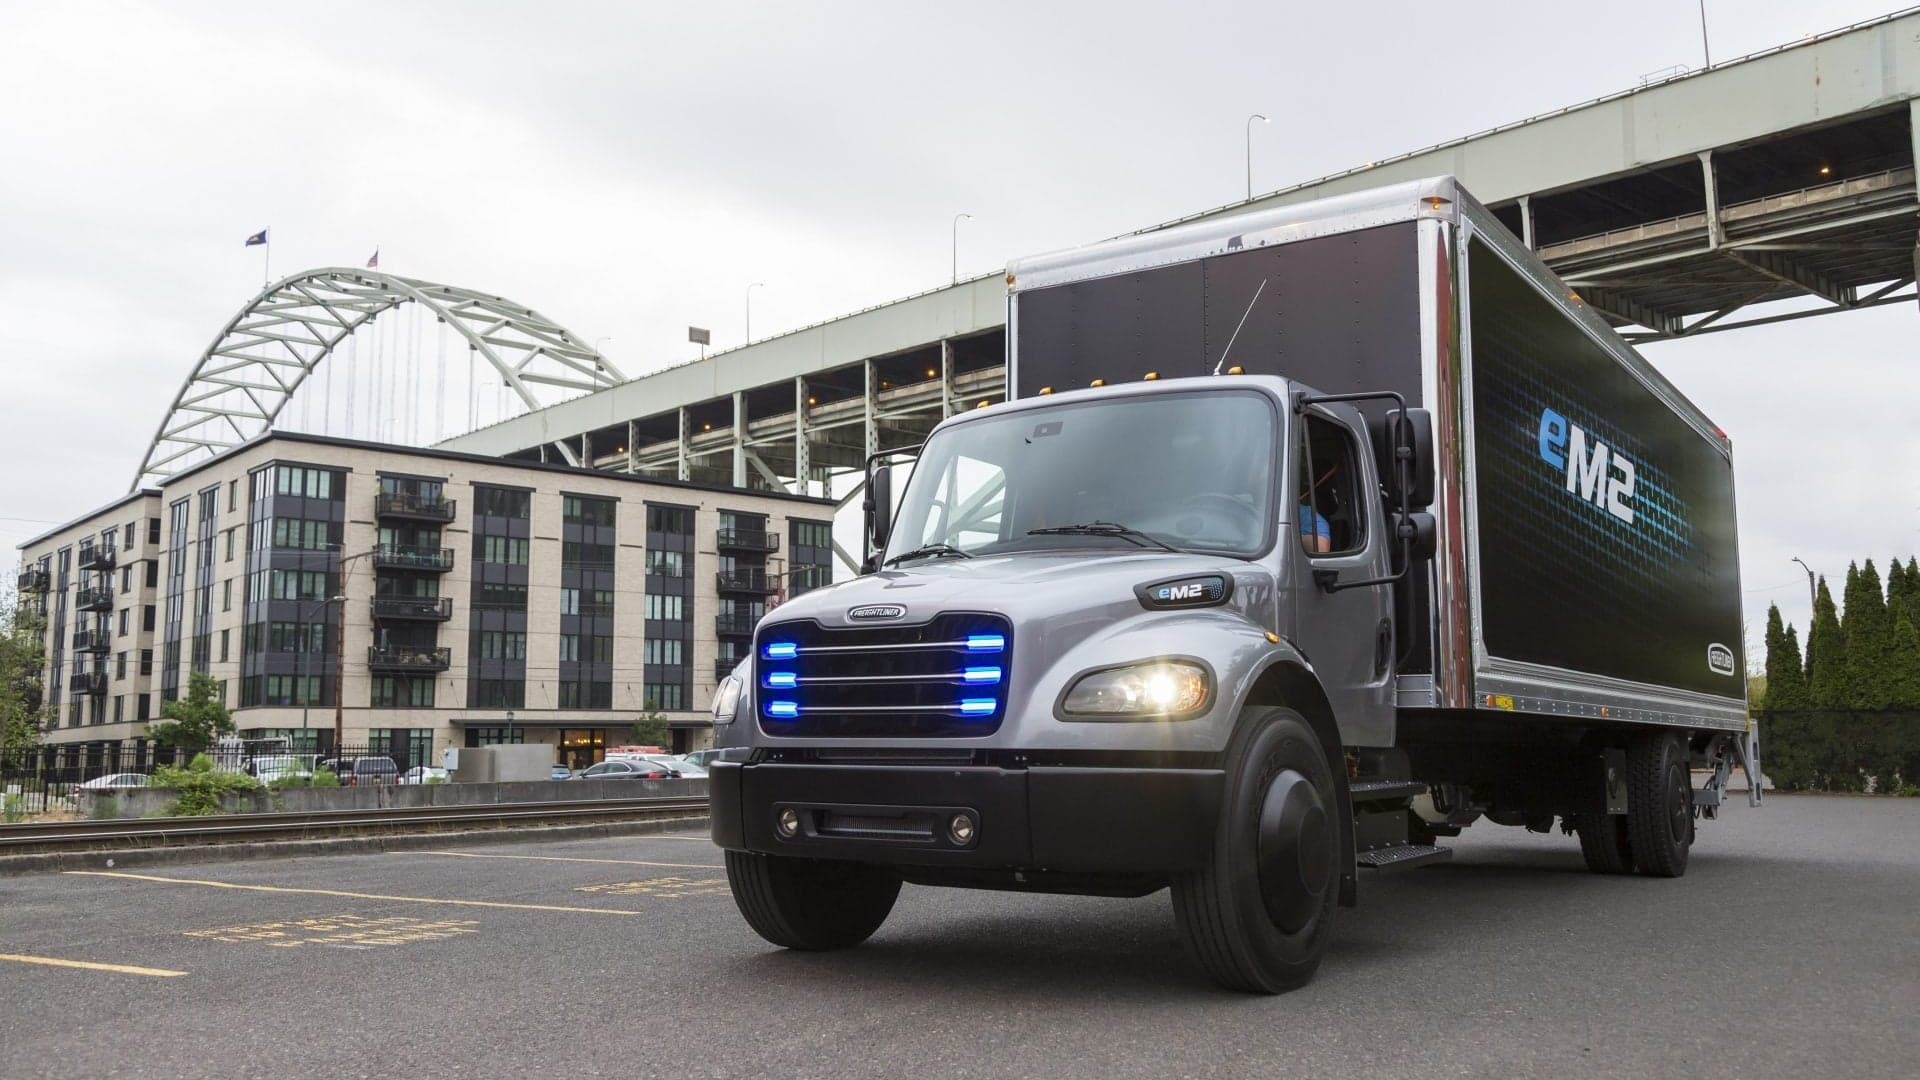 Penske Opens Fast-Charging Stations for Electric Commercial Trucks in California